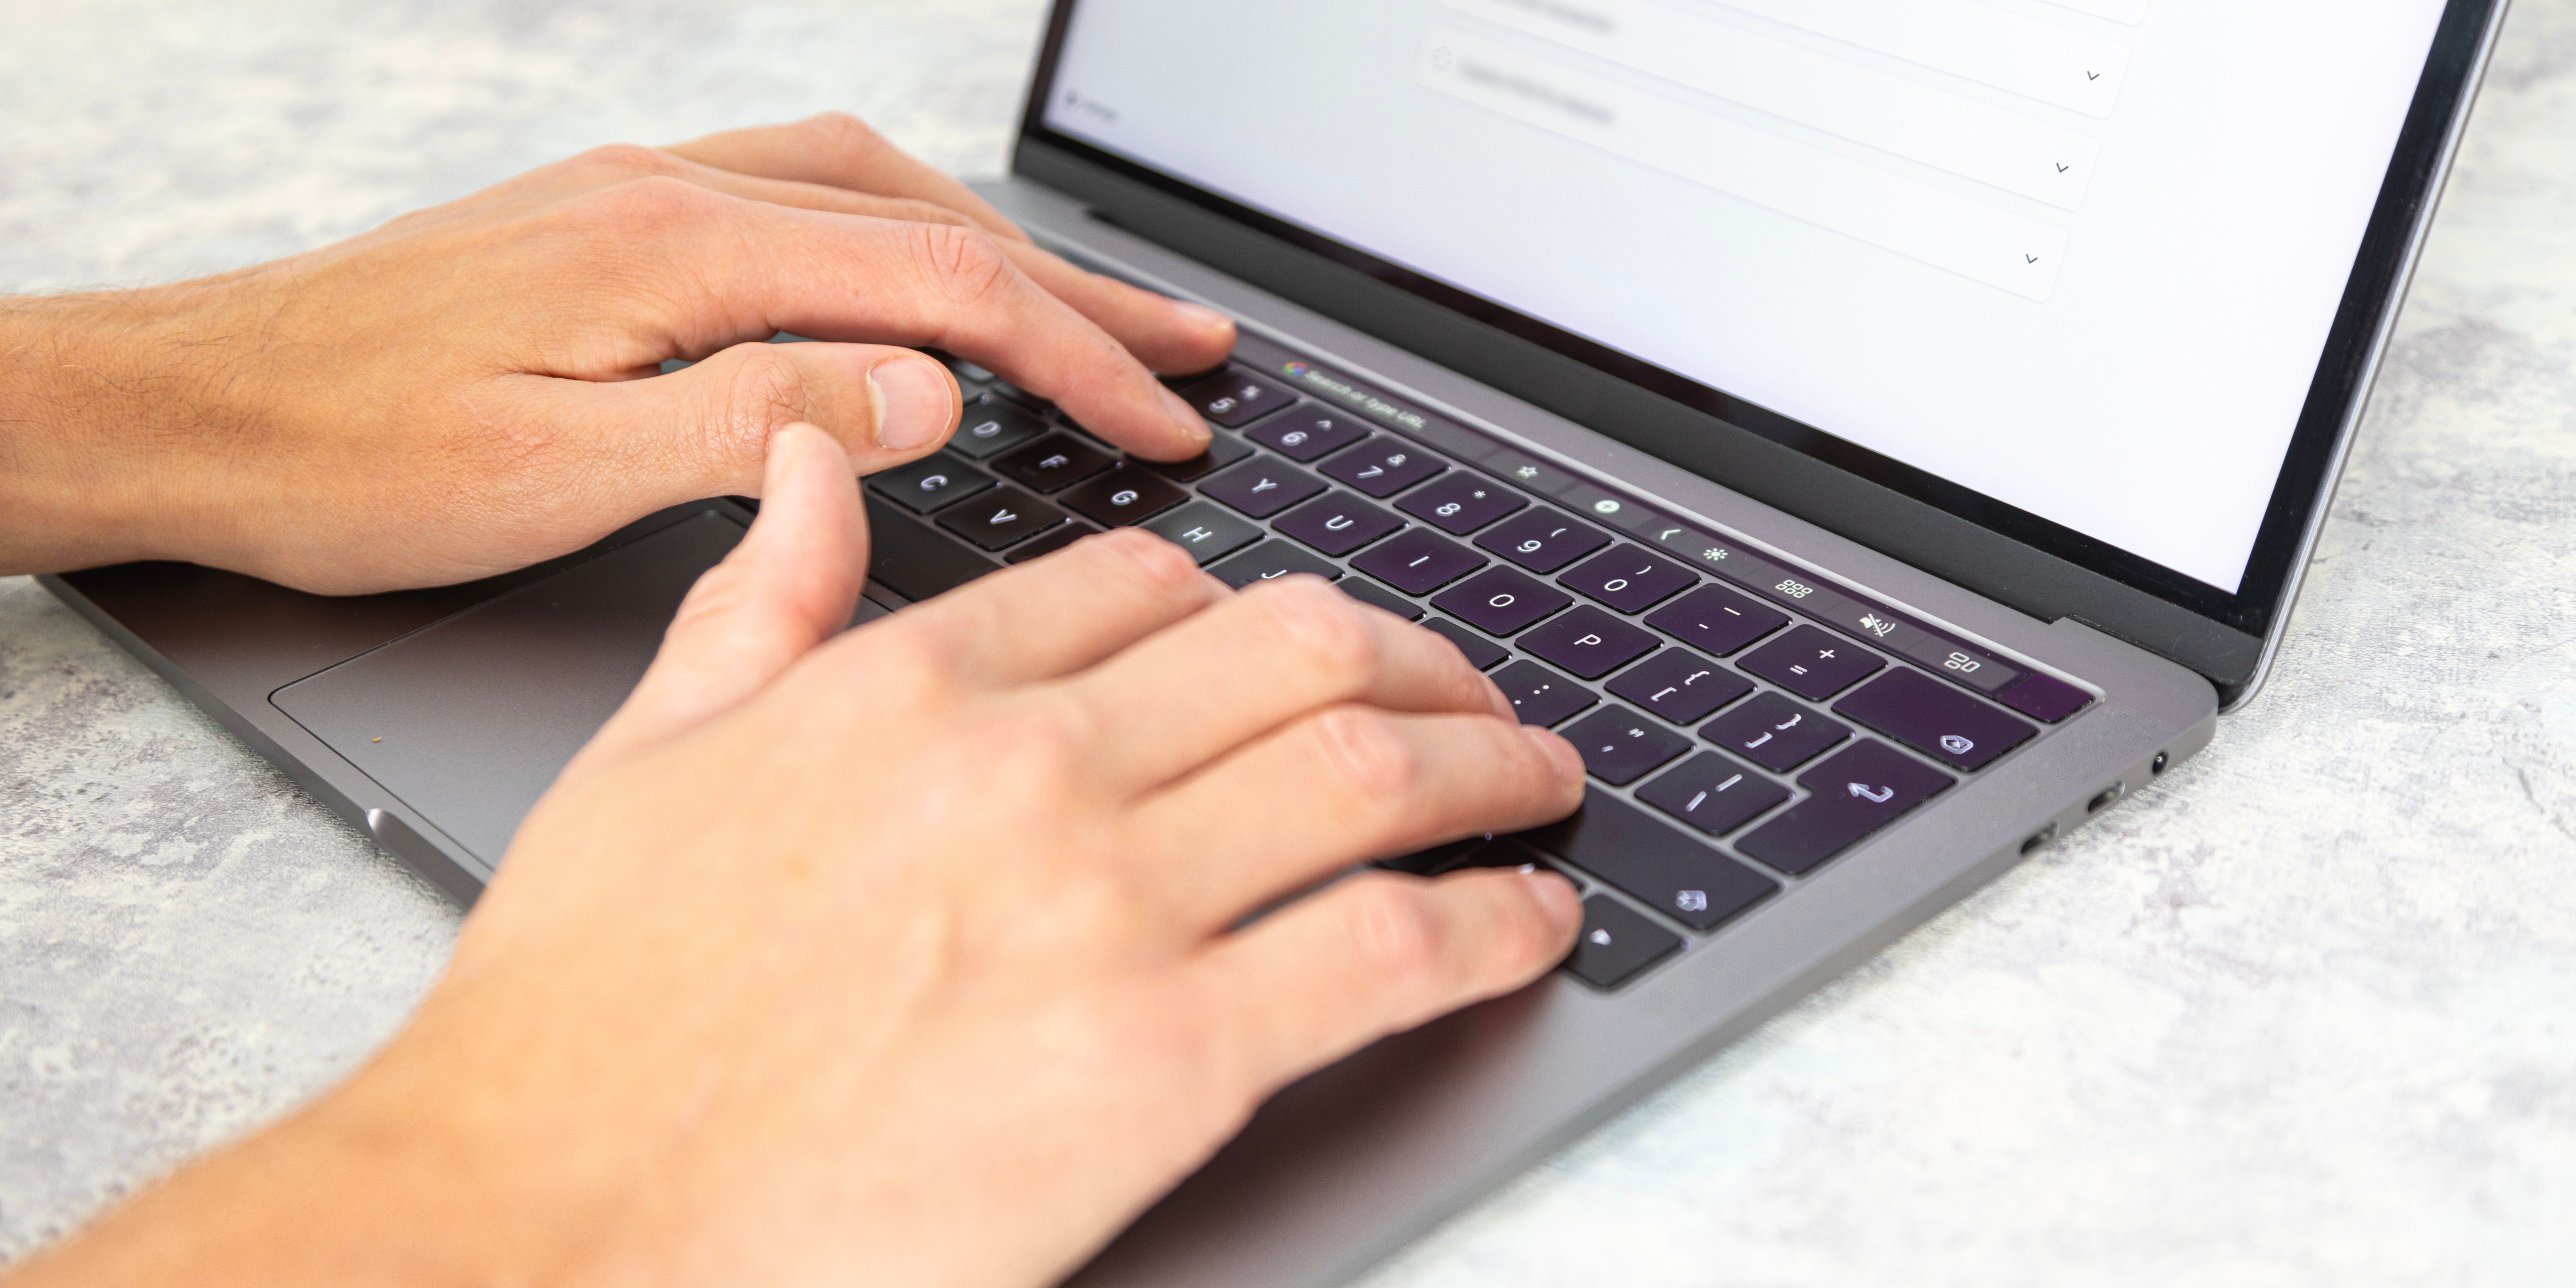 A close-up of a man's hands typing on a laptop keyboard